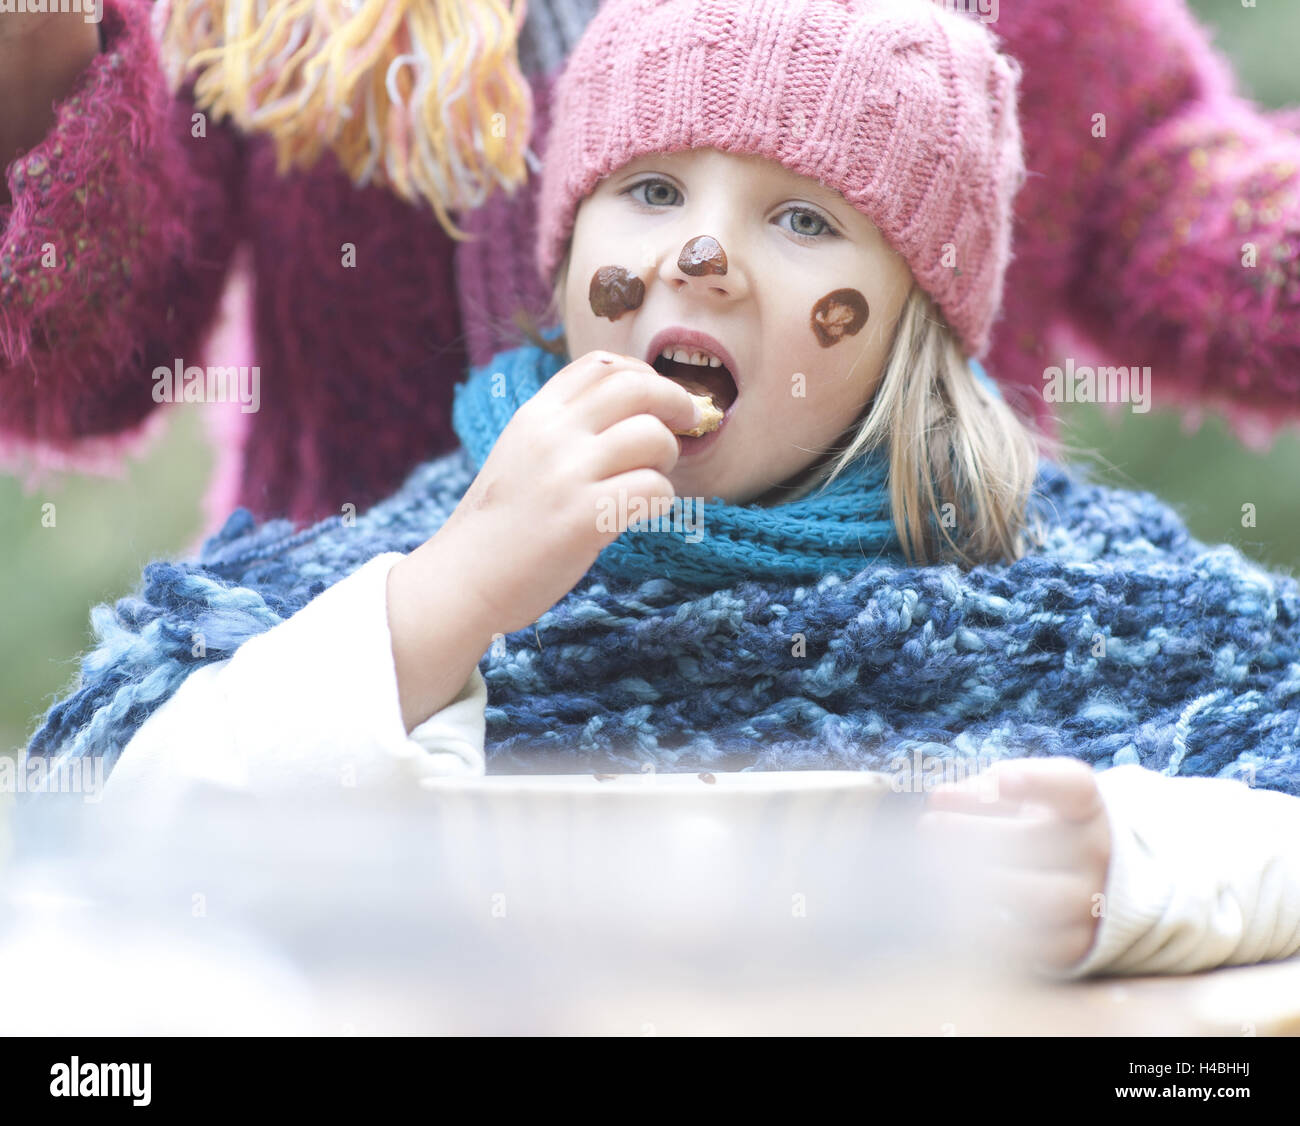 Girl, cookie, eating, nibbling, chocolate in the face, portrait, Stock Photo